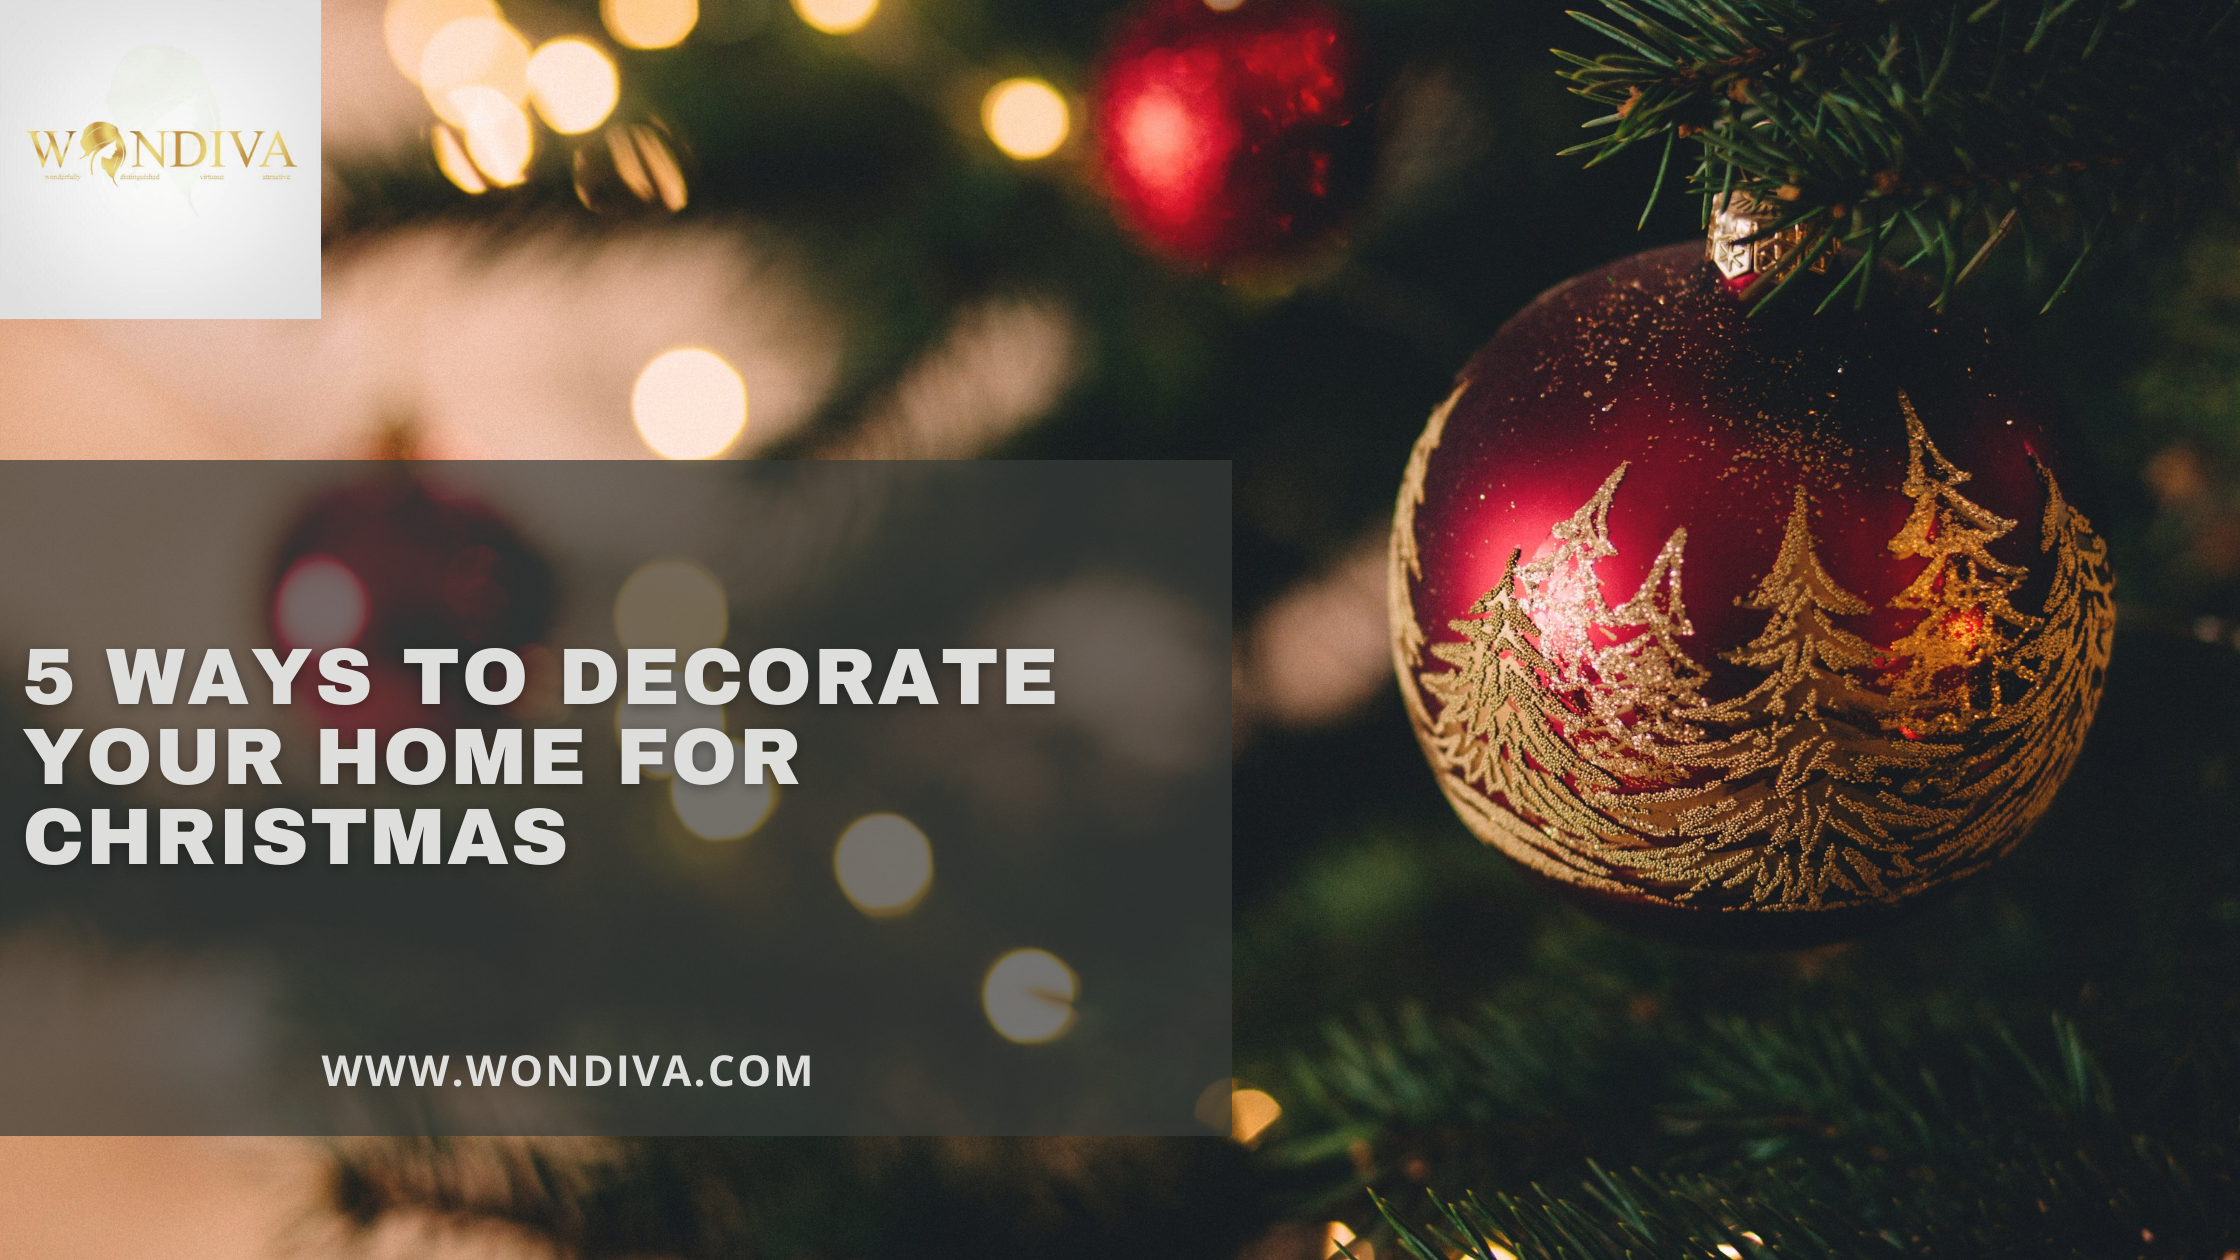 5 Ways To Decorate Your Home For Christmas